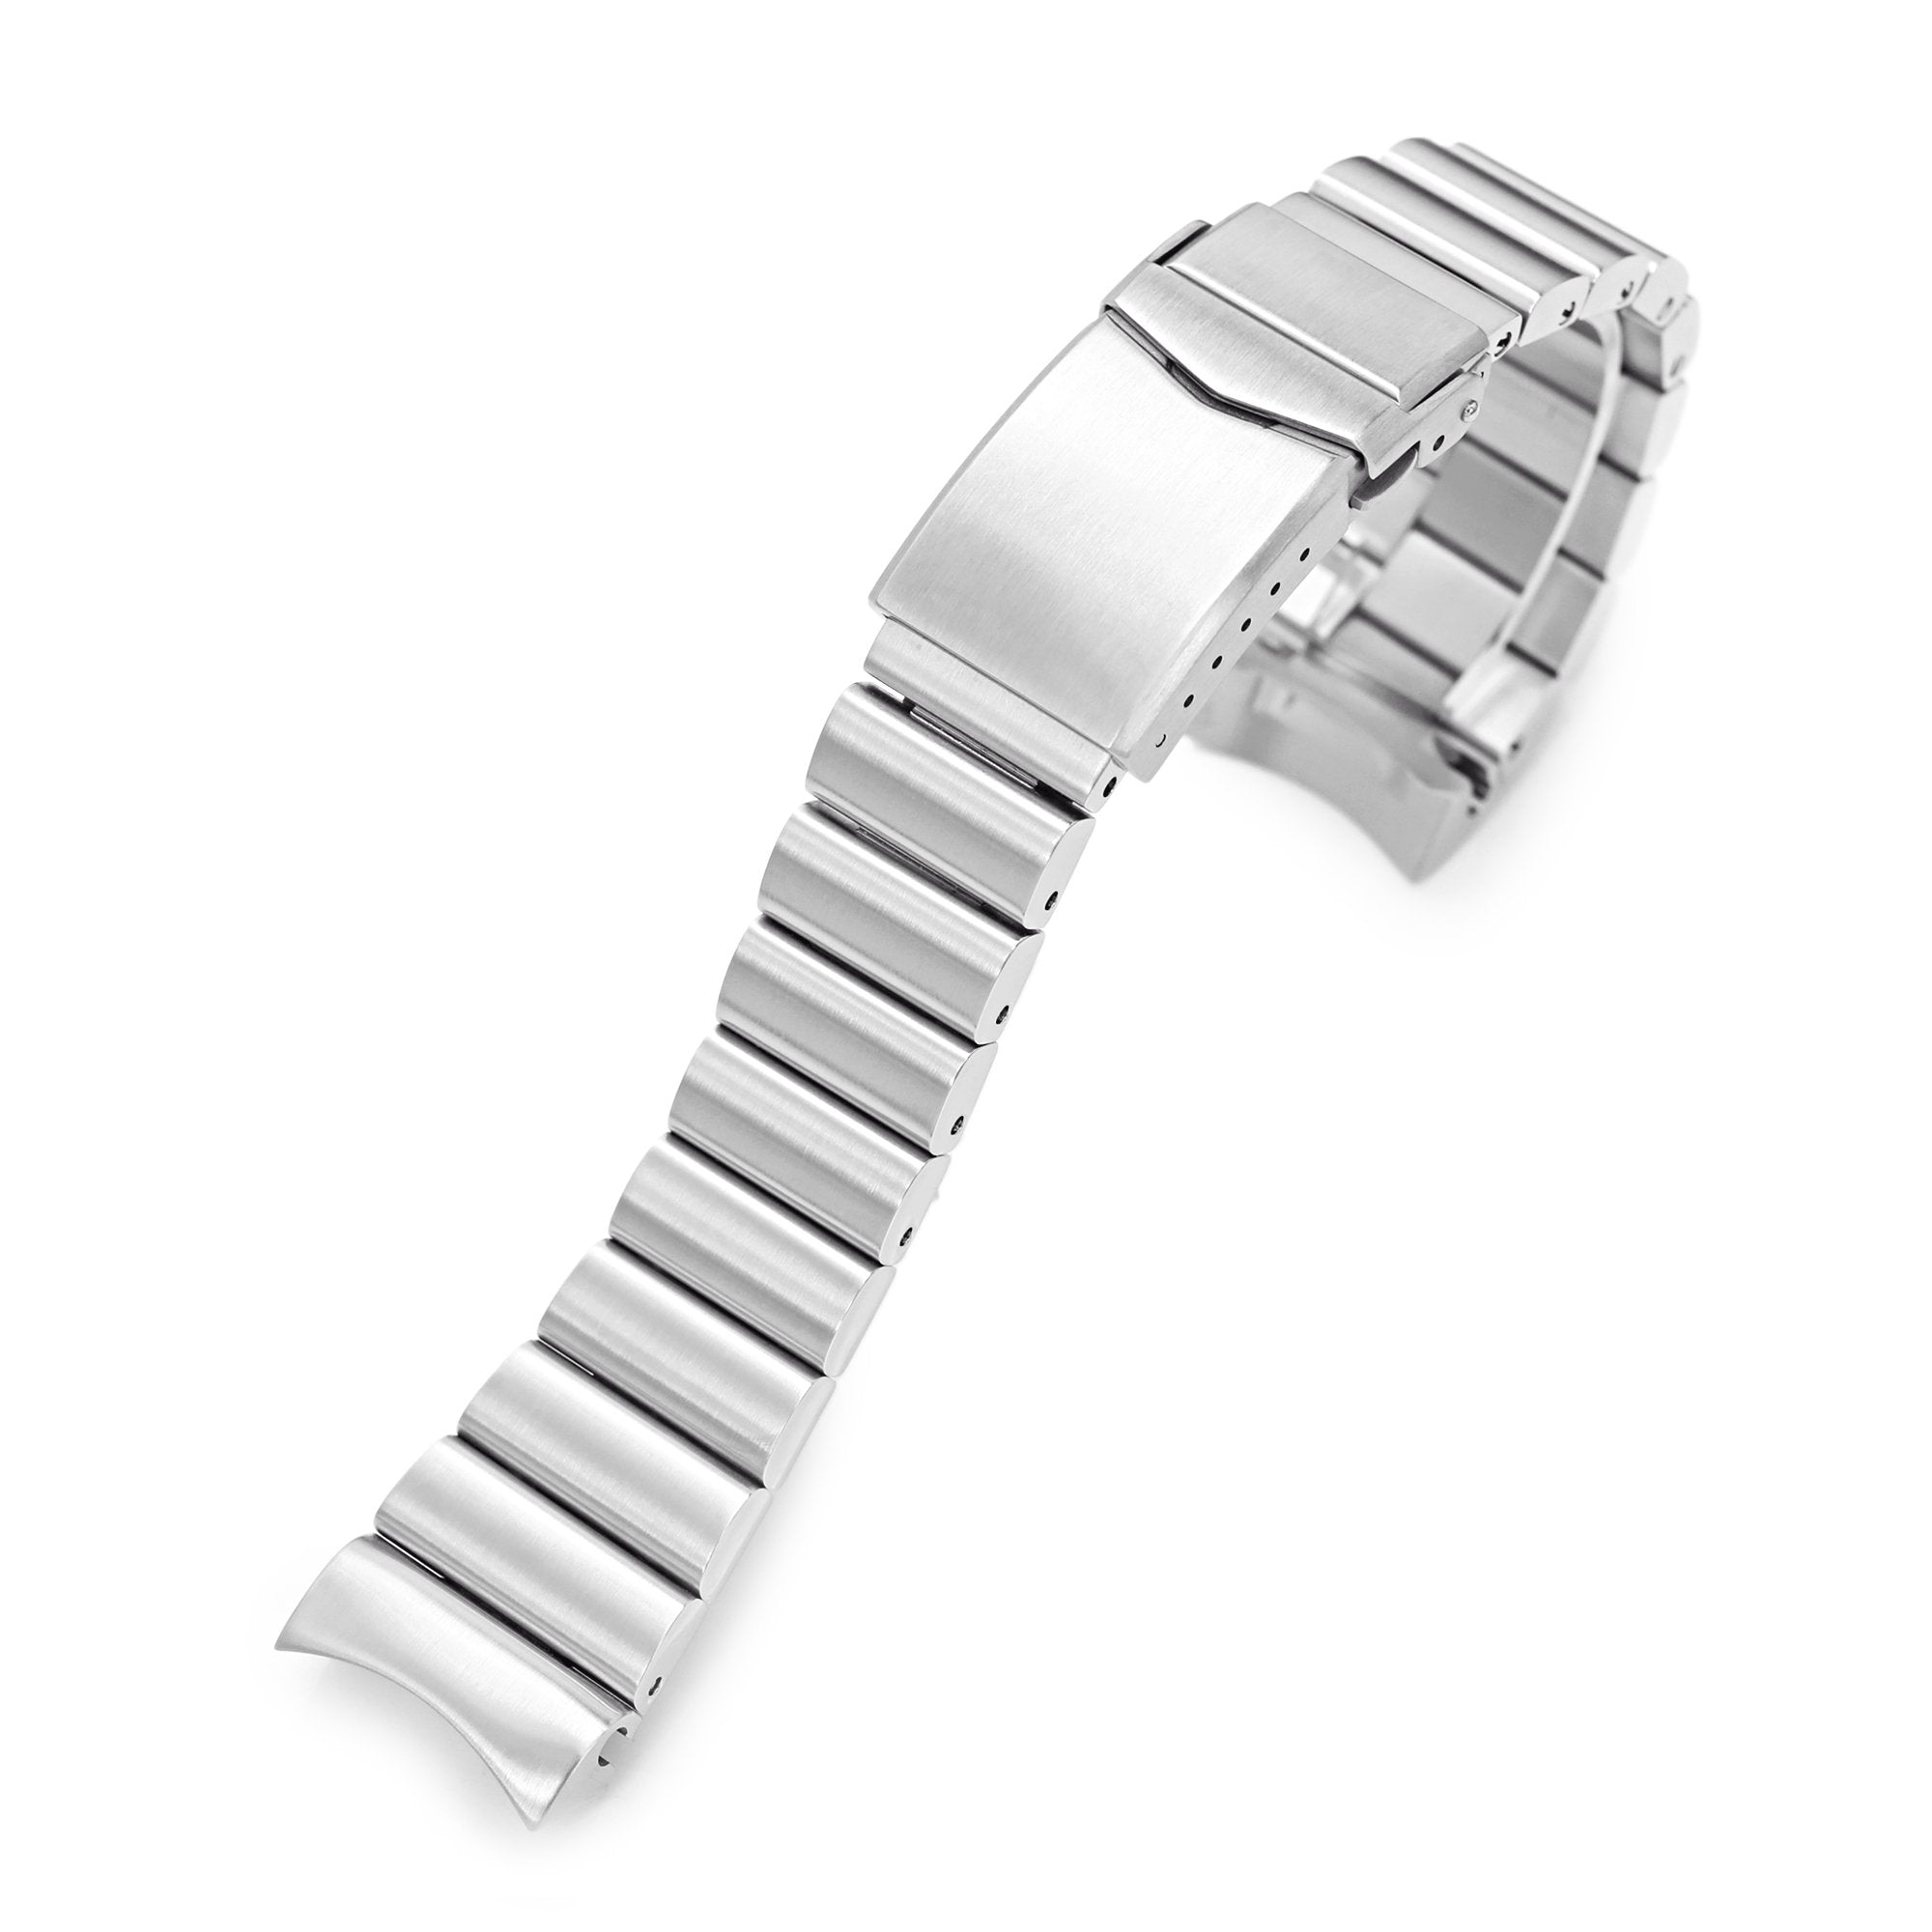 22mm Bandoleer 316L Stainless Steel Watch Bracelet for Seiko SKX007 Brushed V-Clasp Strapcode Watch Bands